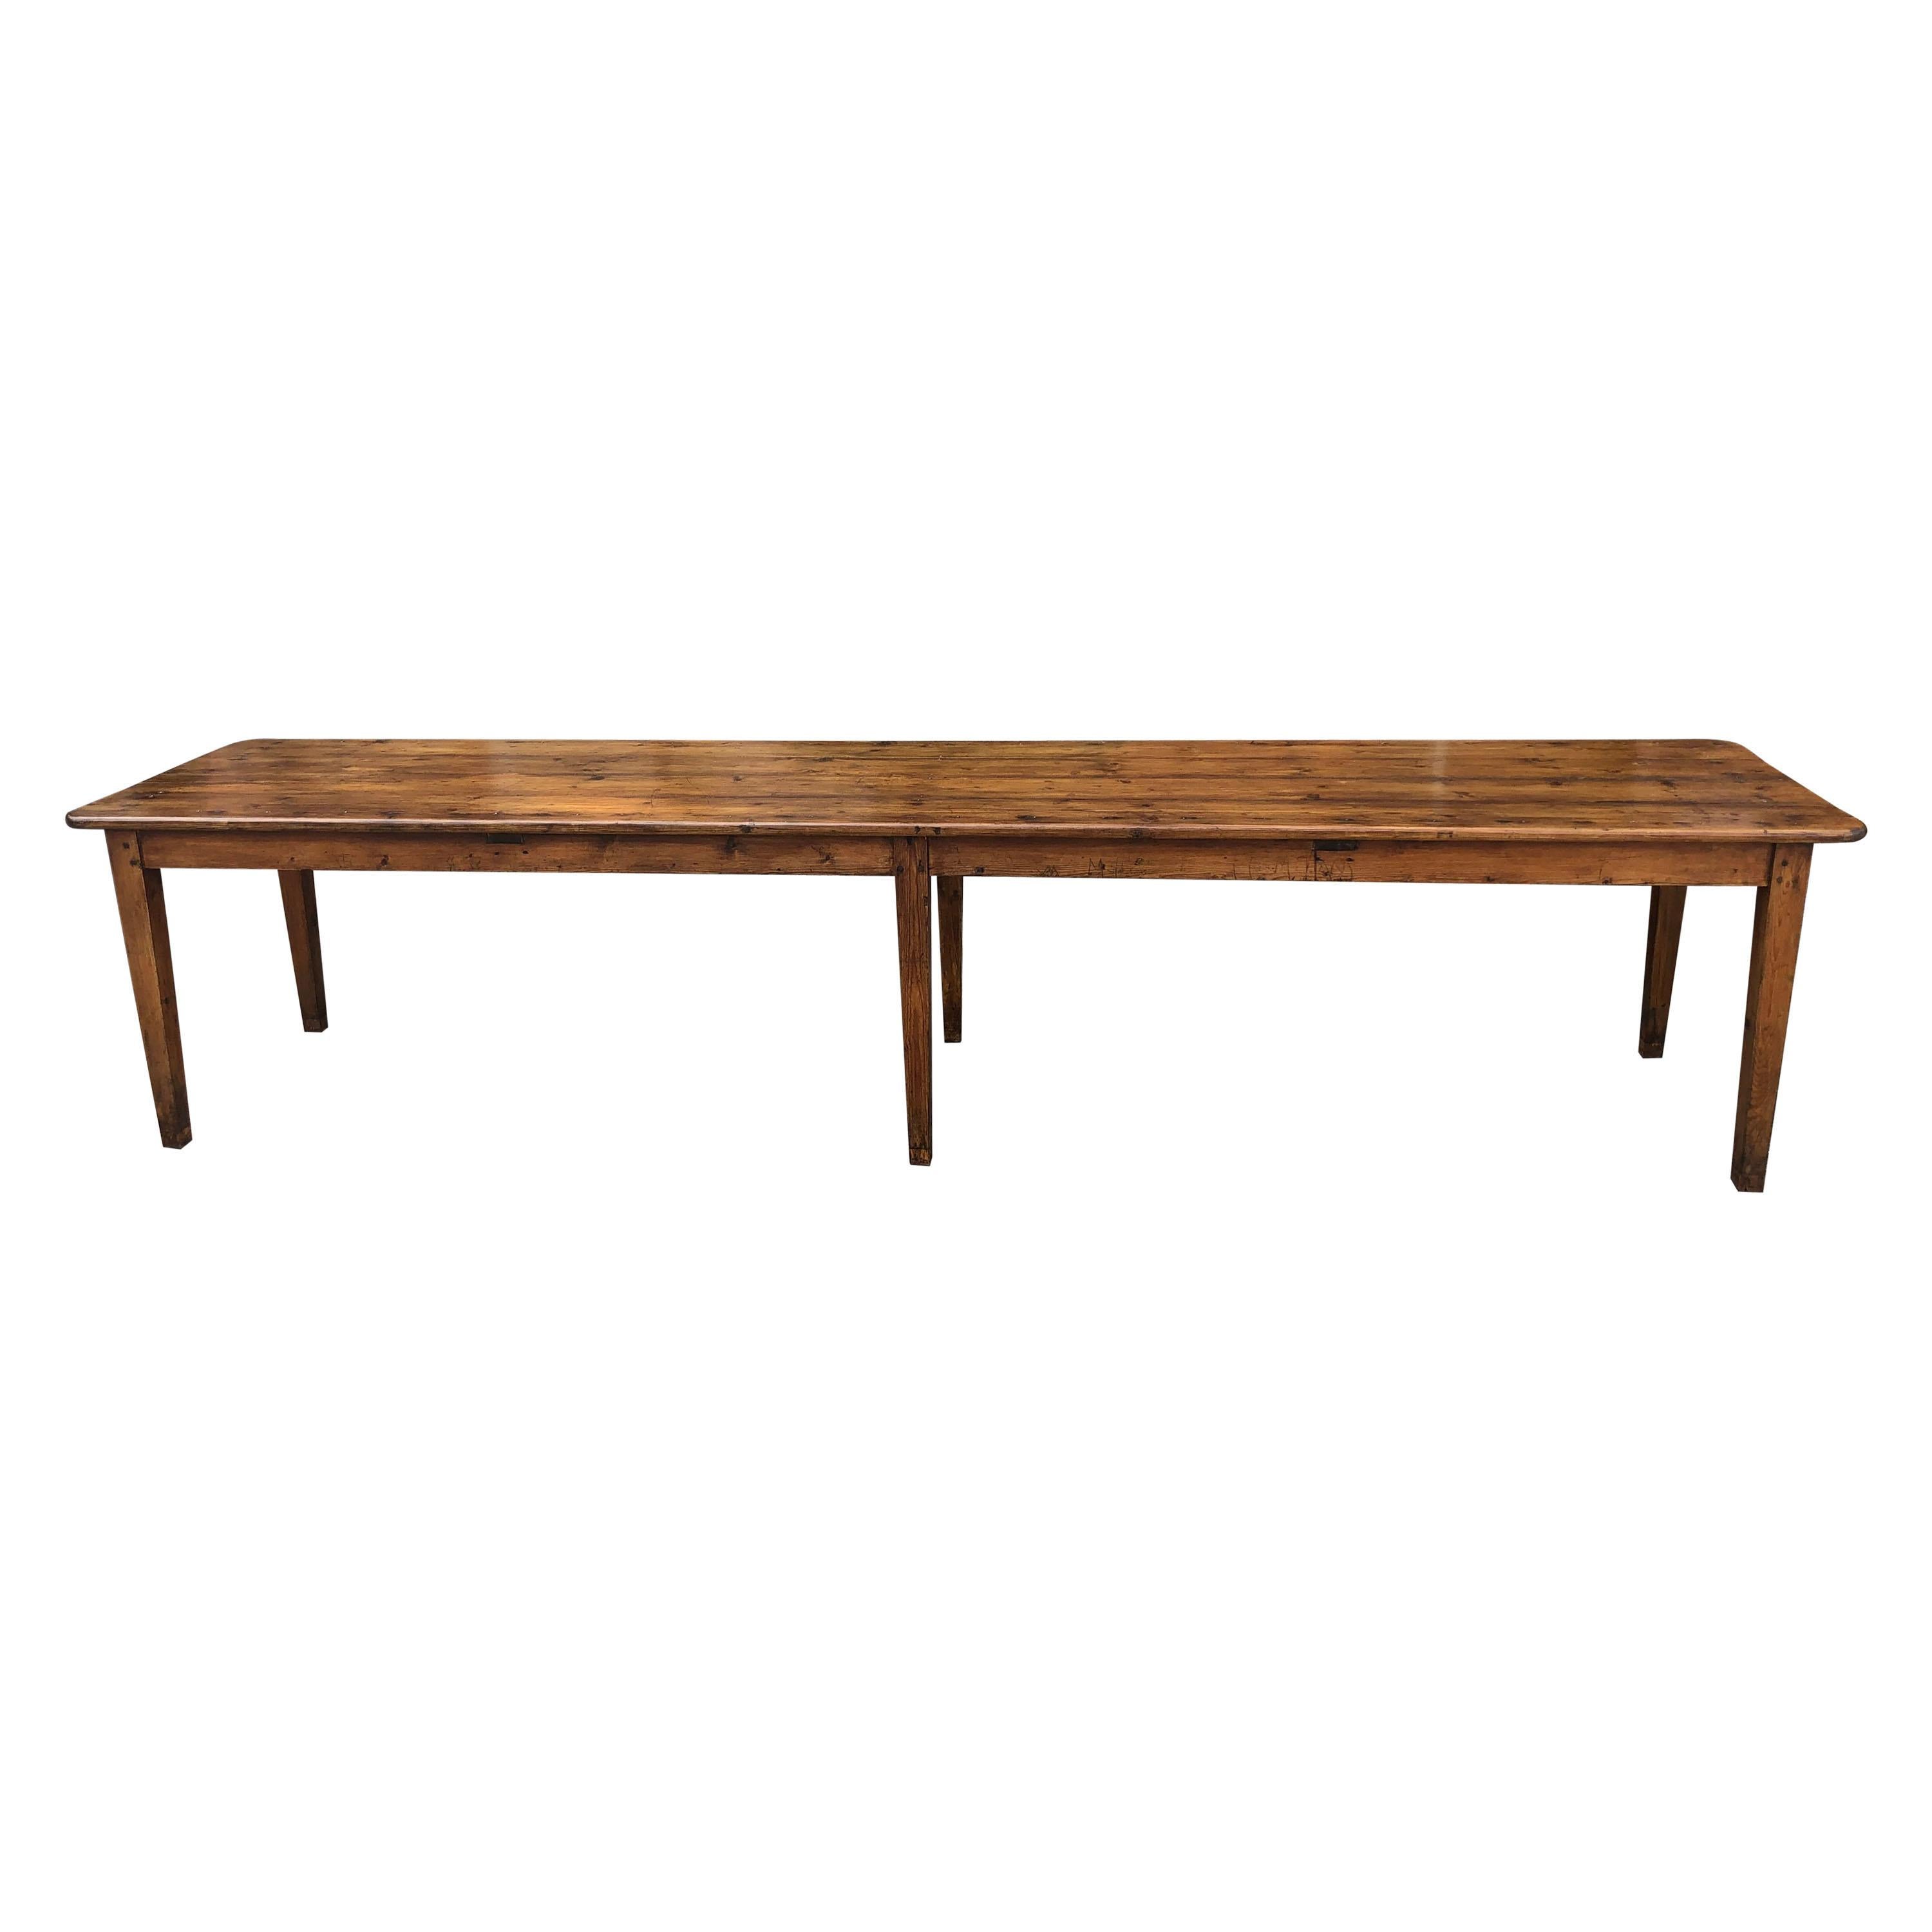 Very Large 19th Century French Farm Dining Table